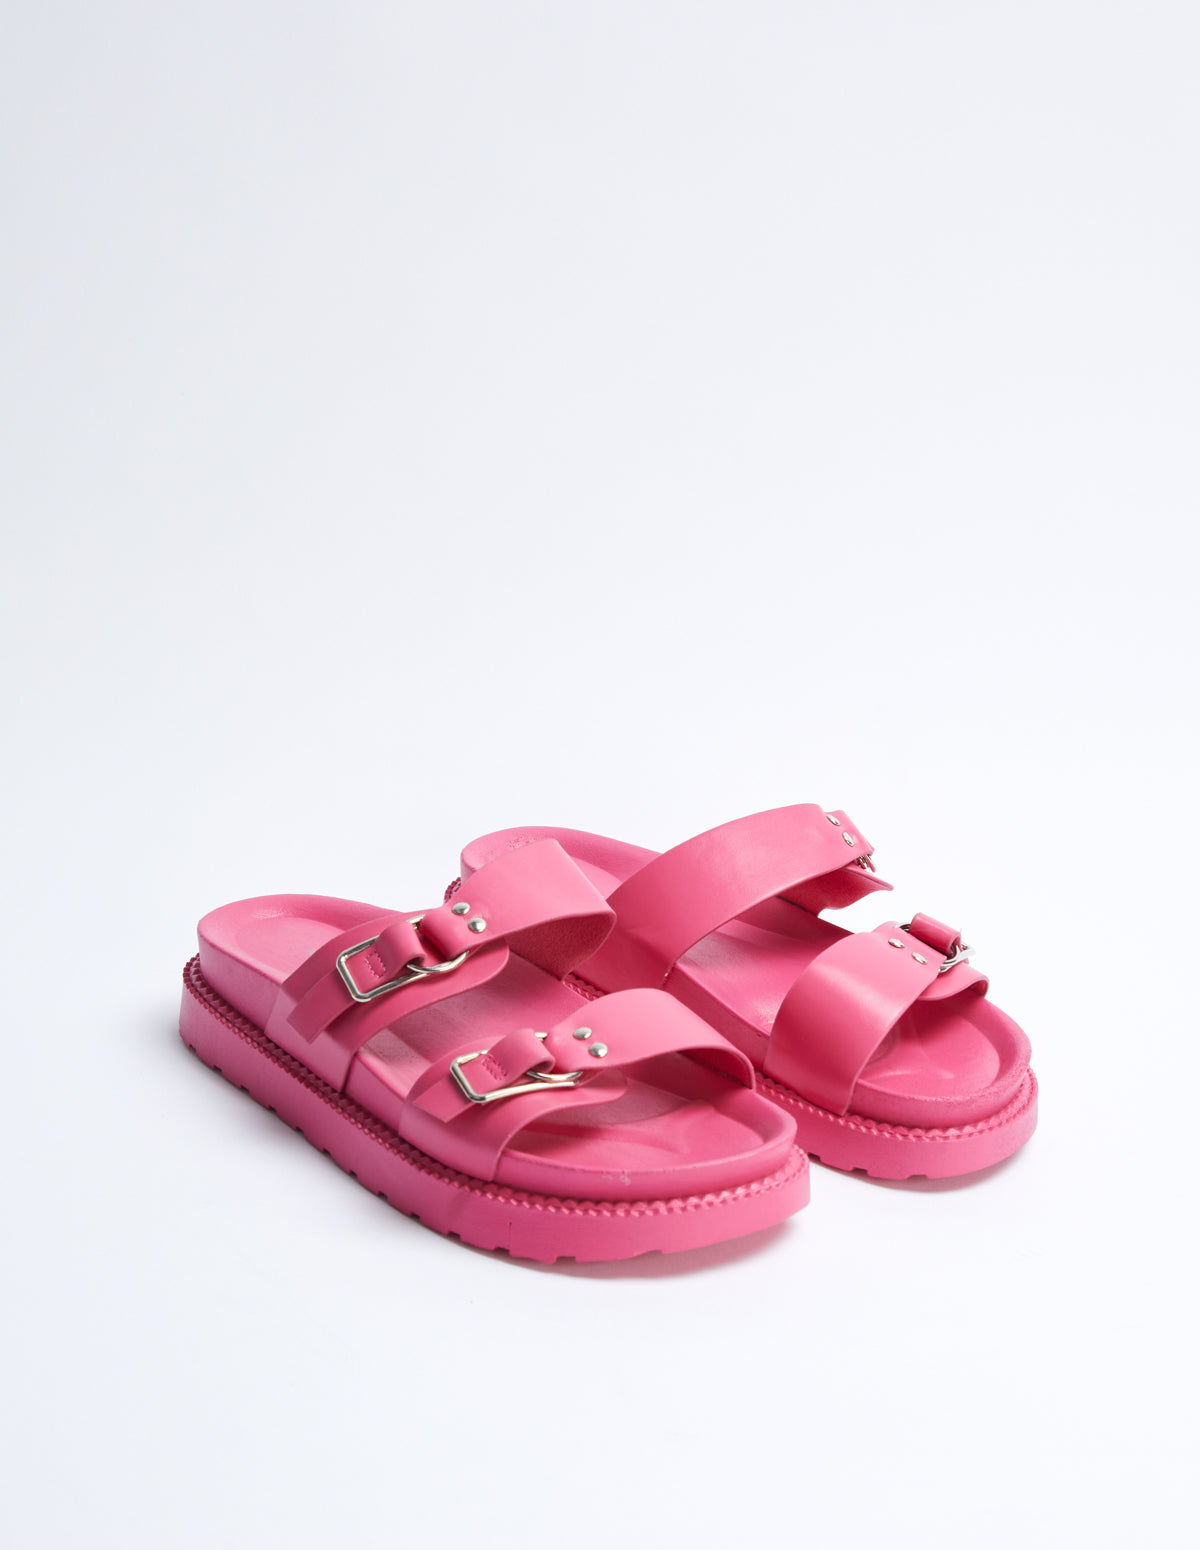 Two Strap Buckle Sandals - Jul